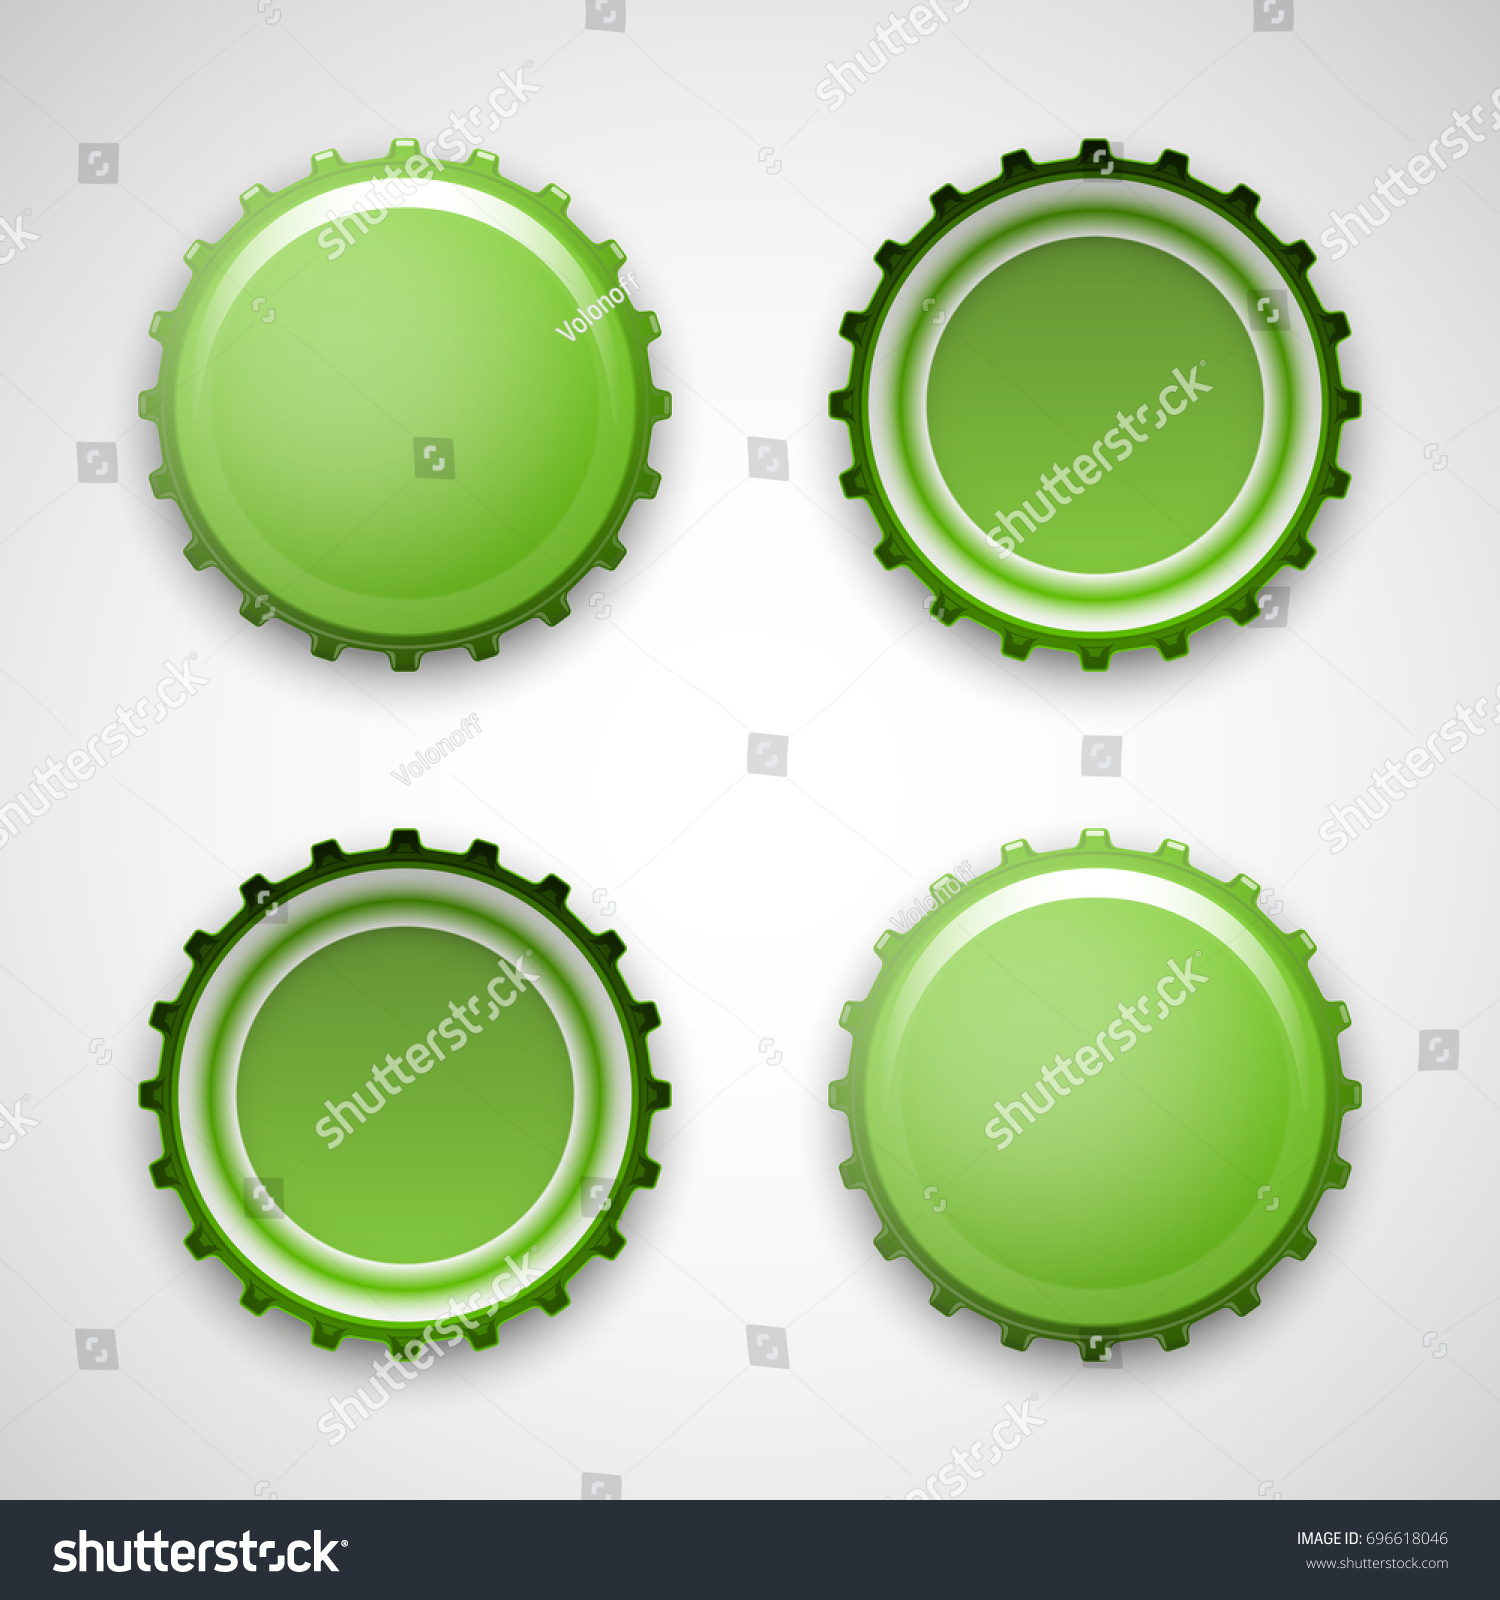 Download Picture Beer Metal Lid Bottle View Stock Vector Royalty Free 696618046 PSD Mockup Templates